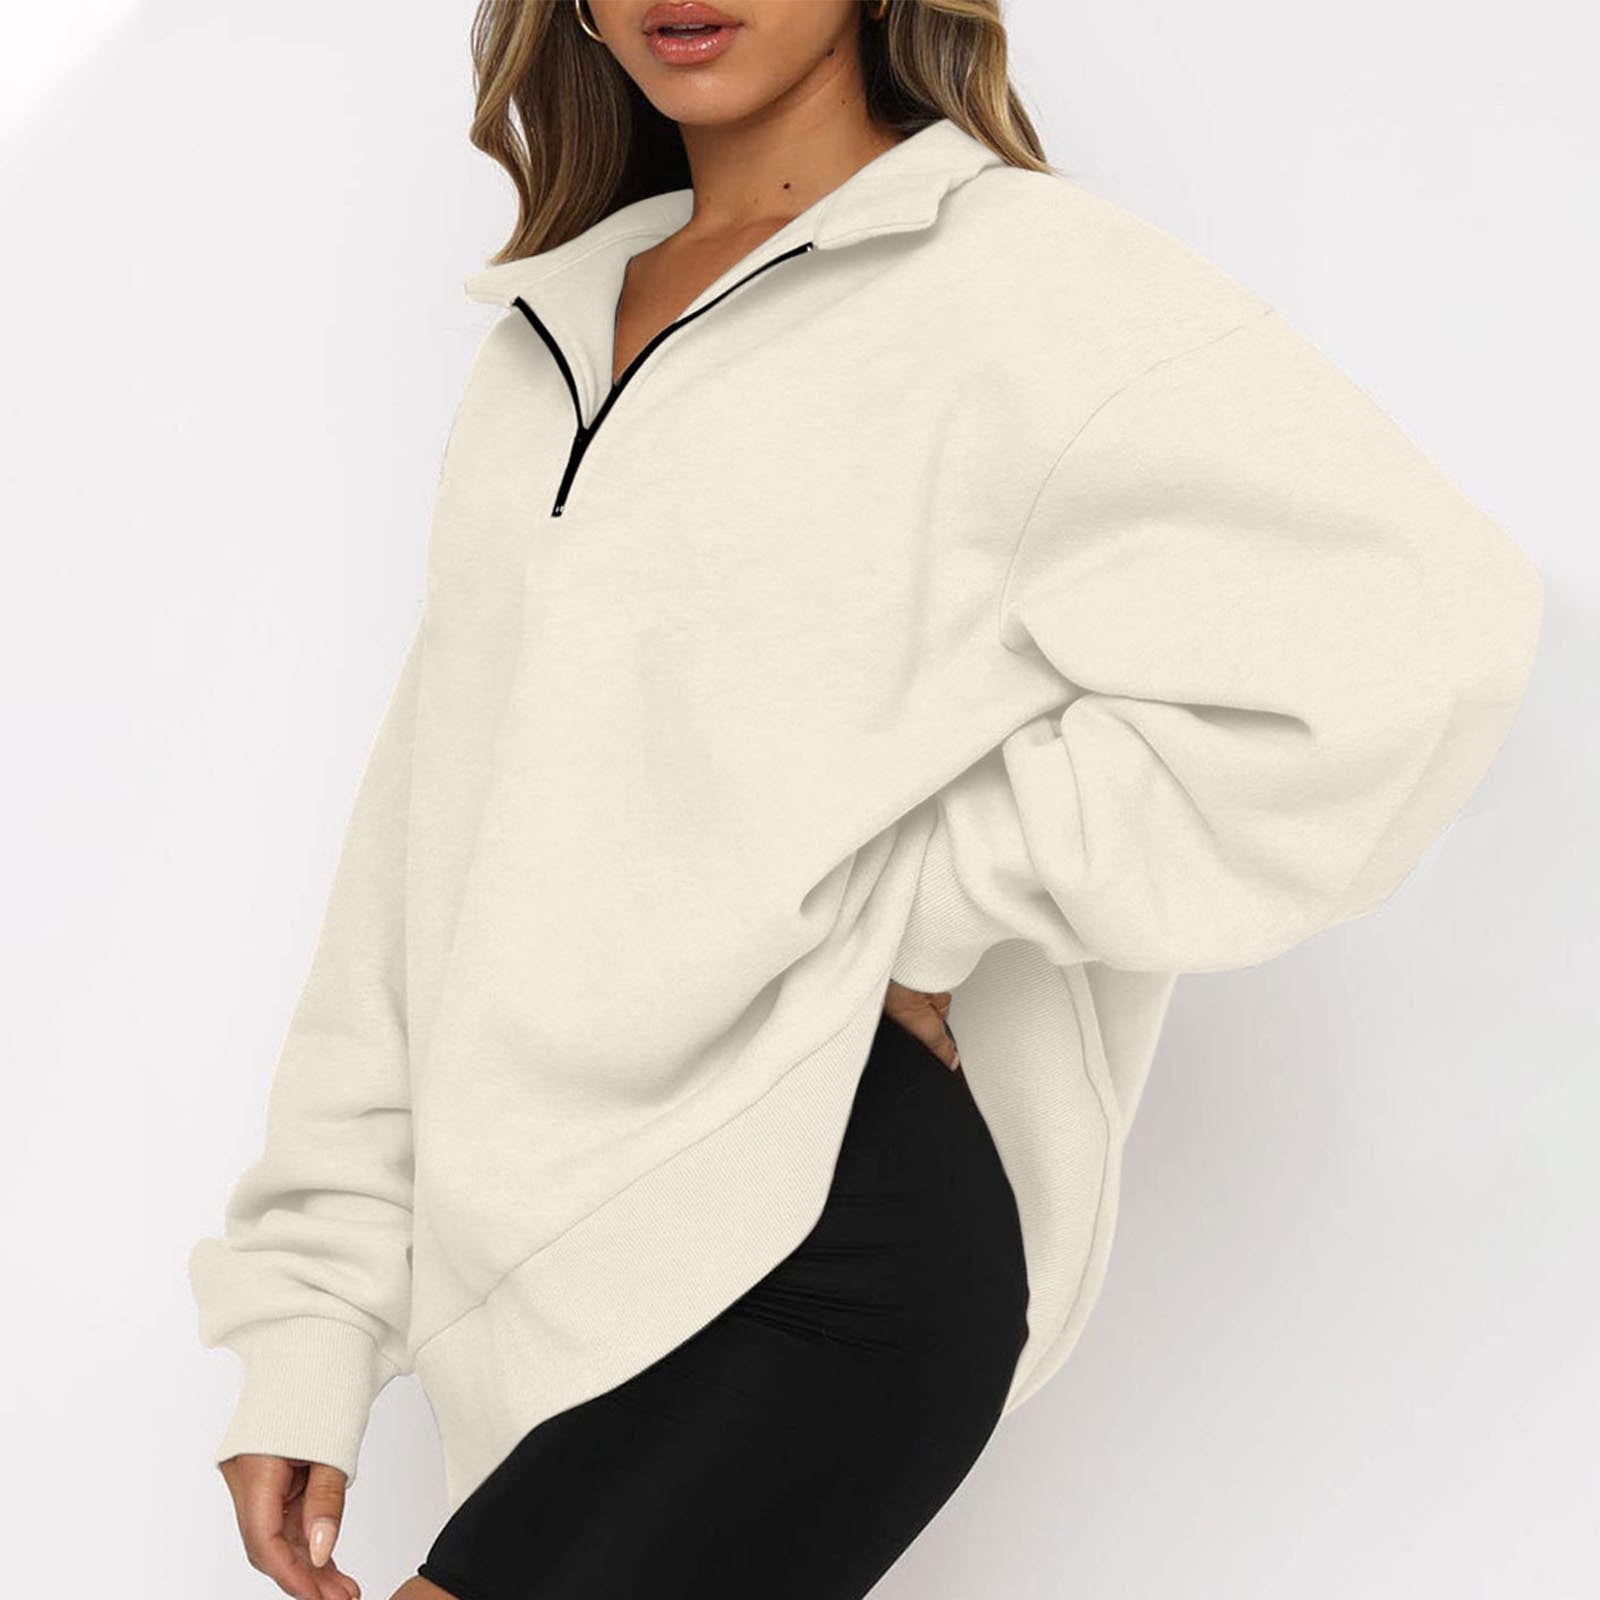 Frostluinai Clearance Items！Sweaters For Women Trendy Queen